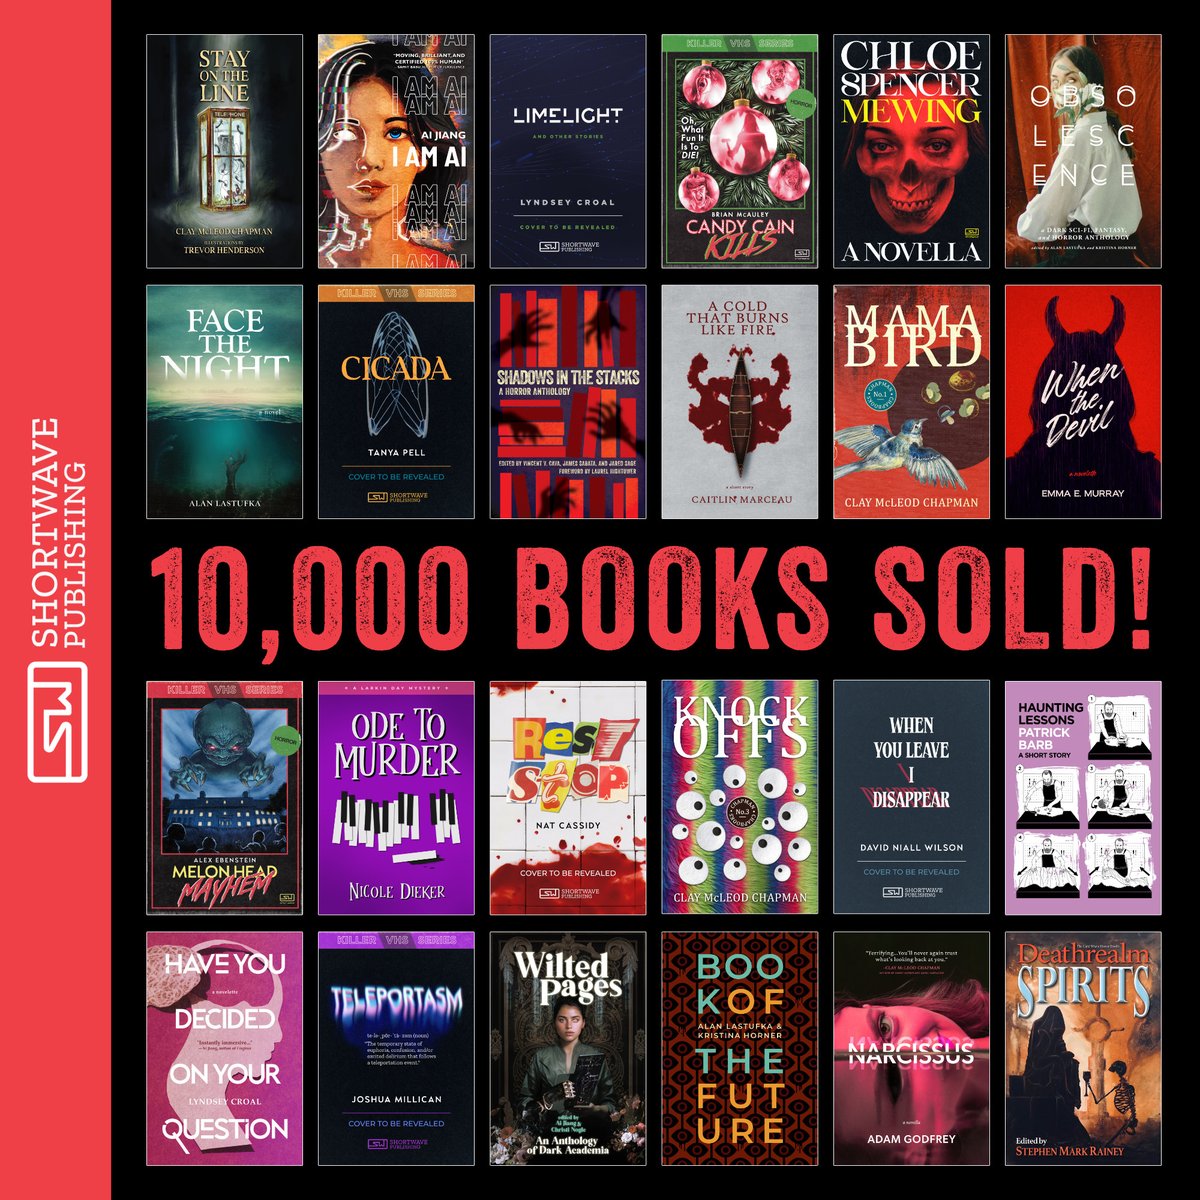 We sold our 10,000th book last night! 🎉 This is all since publishing our first title, FACE THE NIGHT, on March 8, 2022, so it took us just over 2 years (and that first year, we only had two titles). Thank you all so much for your early support. We will continue to work hard…